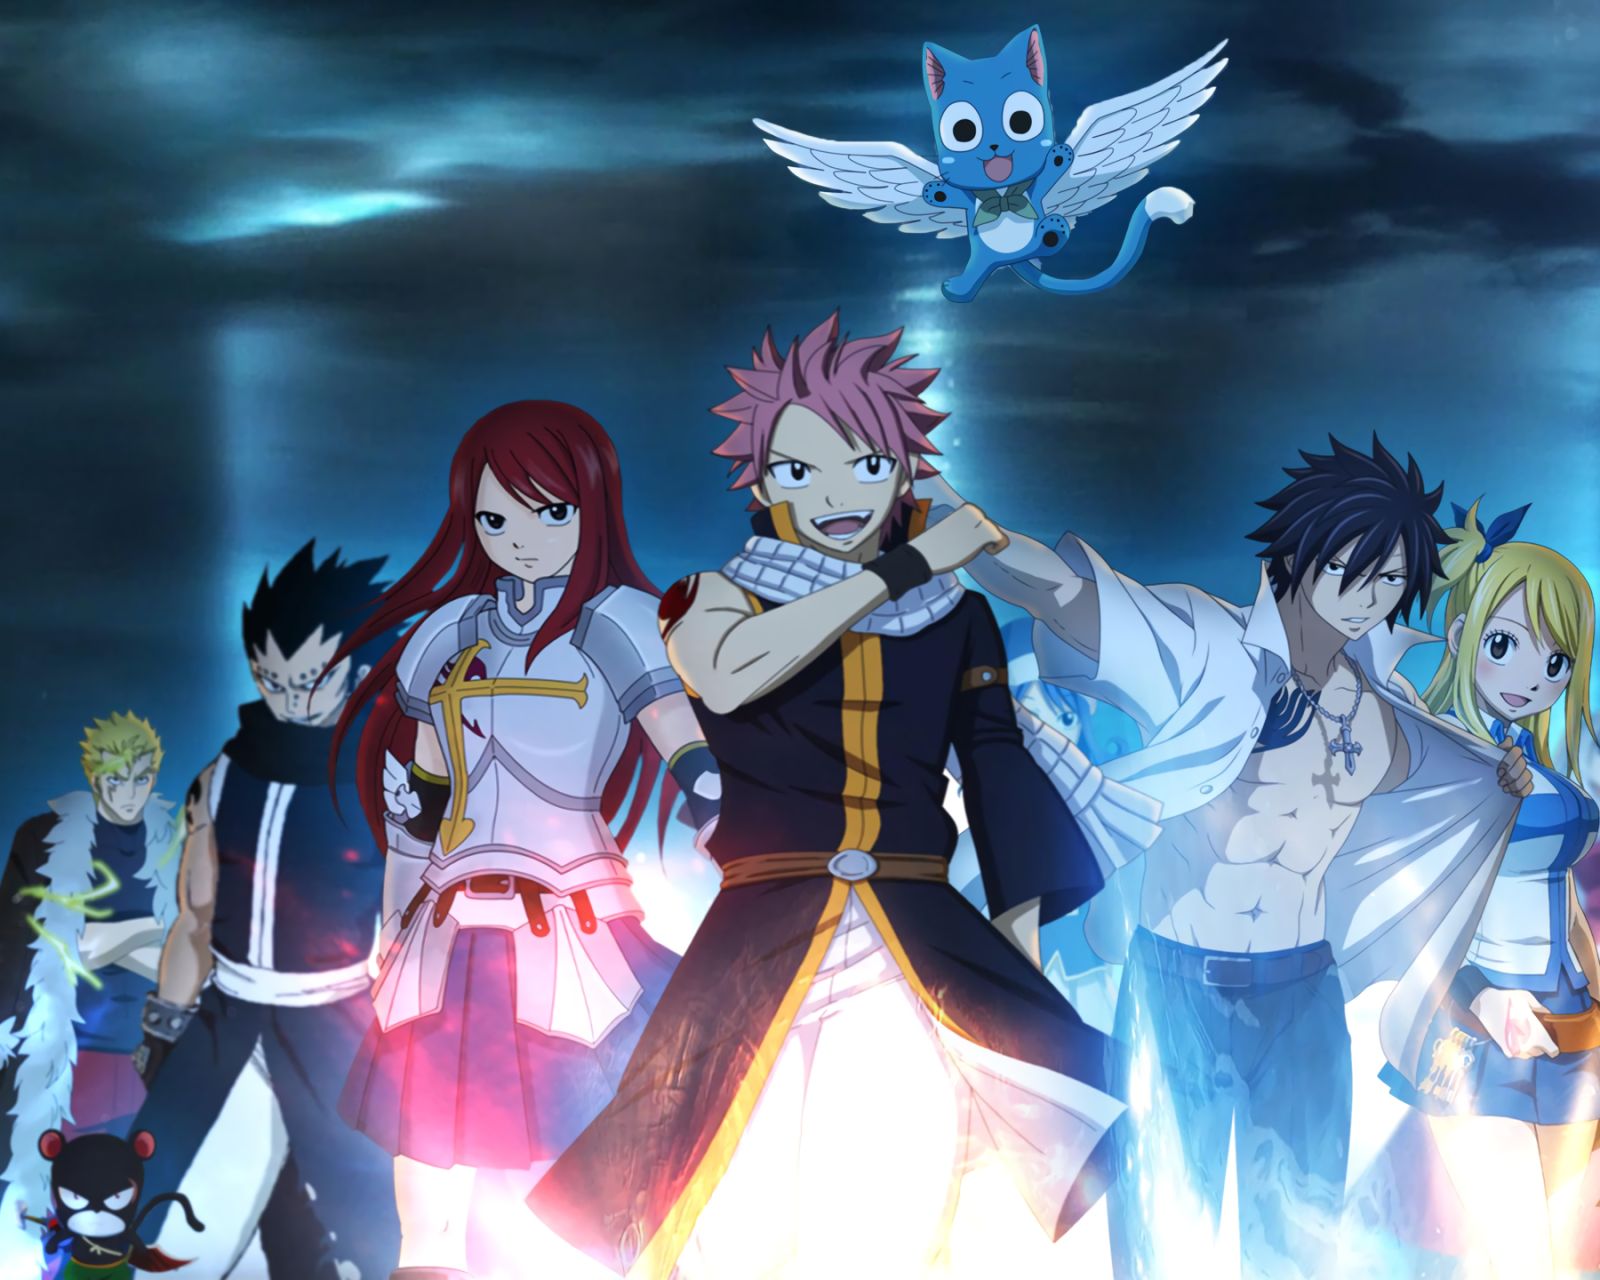 Download mobile wallpaper Anime, Fairy Tail, Lucy Heartfilia, Natsu Dragneel, Erza Scarlet, Gray Fullbuster, Happy (Fairy Tail), Juvia Lockser, Mirajane Strauss, Gajeel Redfox, Charles (Fairy Tail), Wendy Marvell, Laxus Dreyar for free.